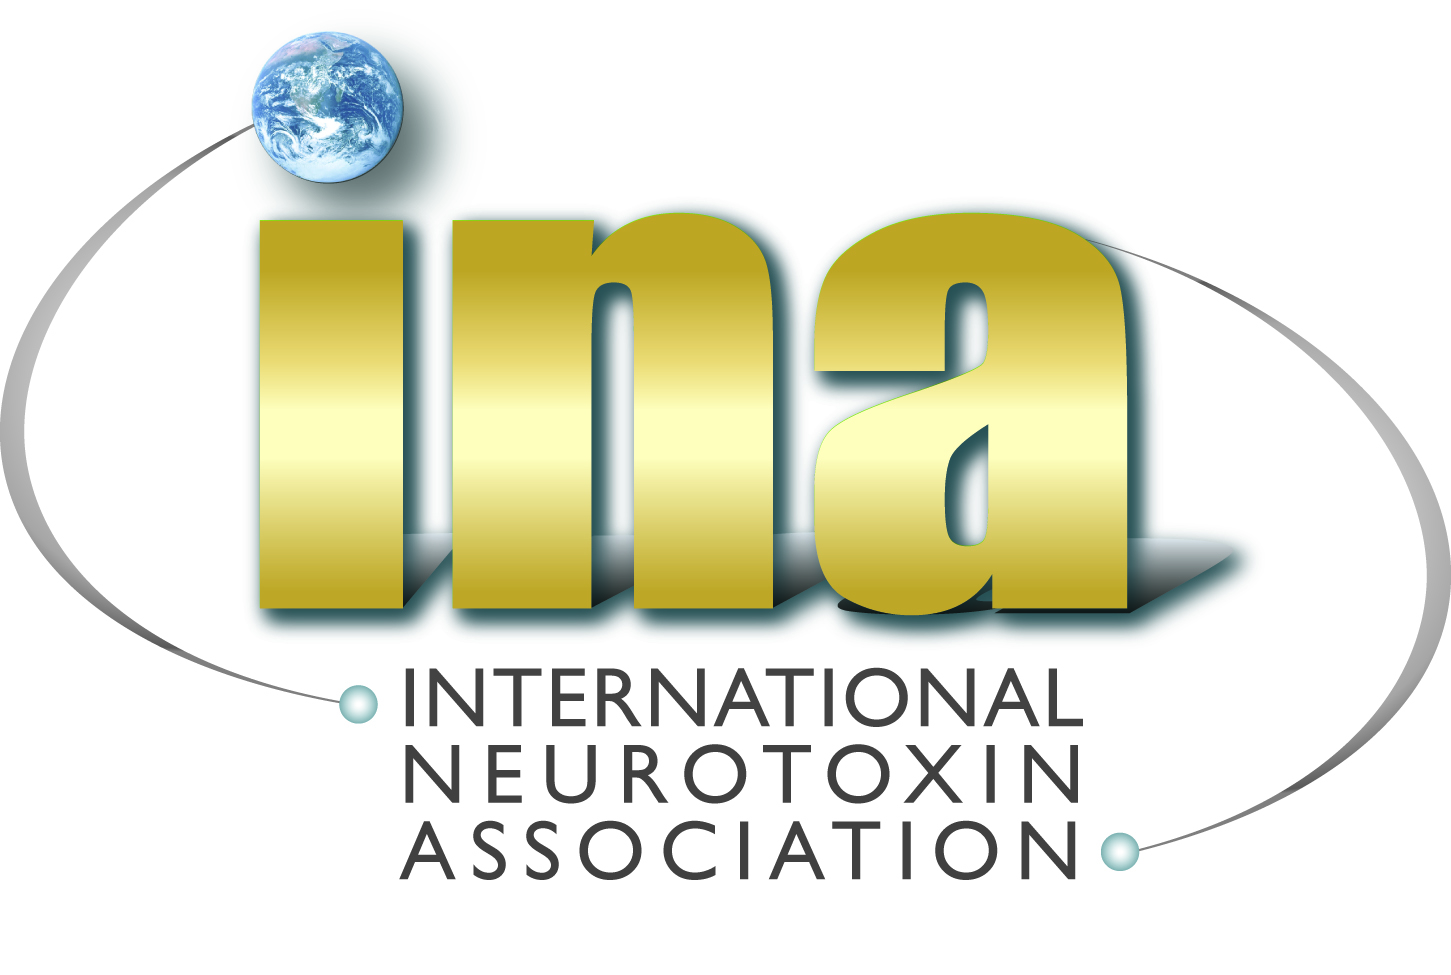 TOXINS 2019 - International Neurotoxin Association International Conference TOXINS 2019: Basic Science and Clinical Aspects of Botulinum and Other Neurotoxins